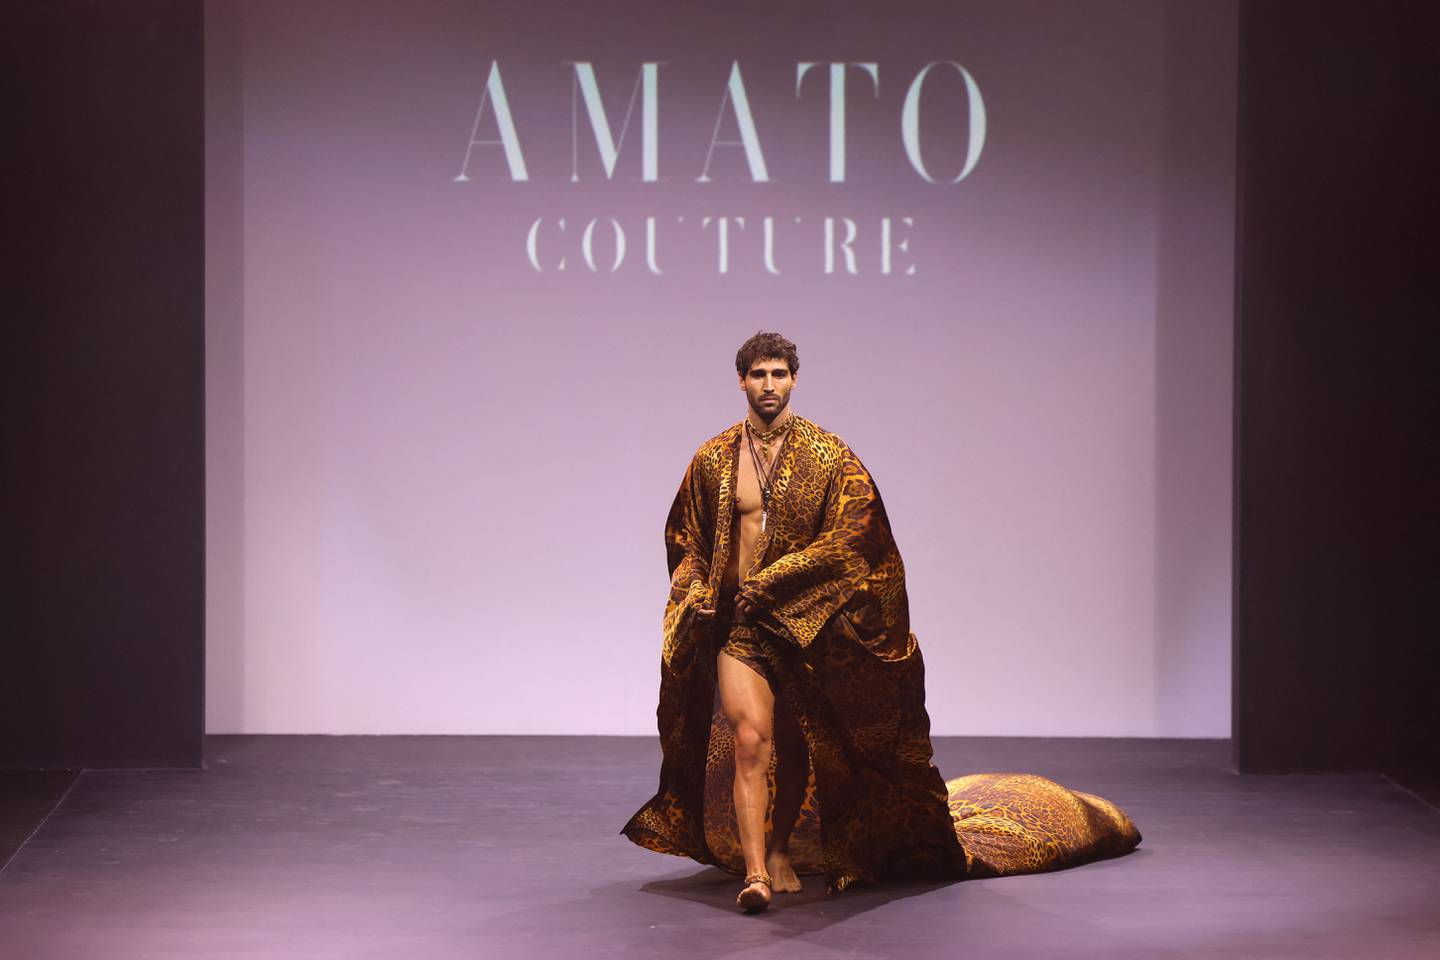 Model Sajad Pourhasan, the first Amato Man, opened the show. AFP